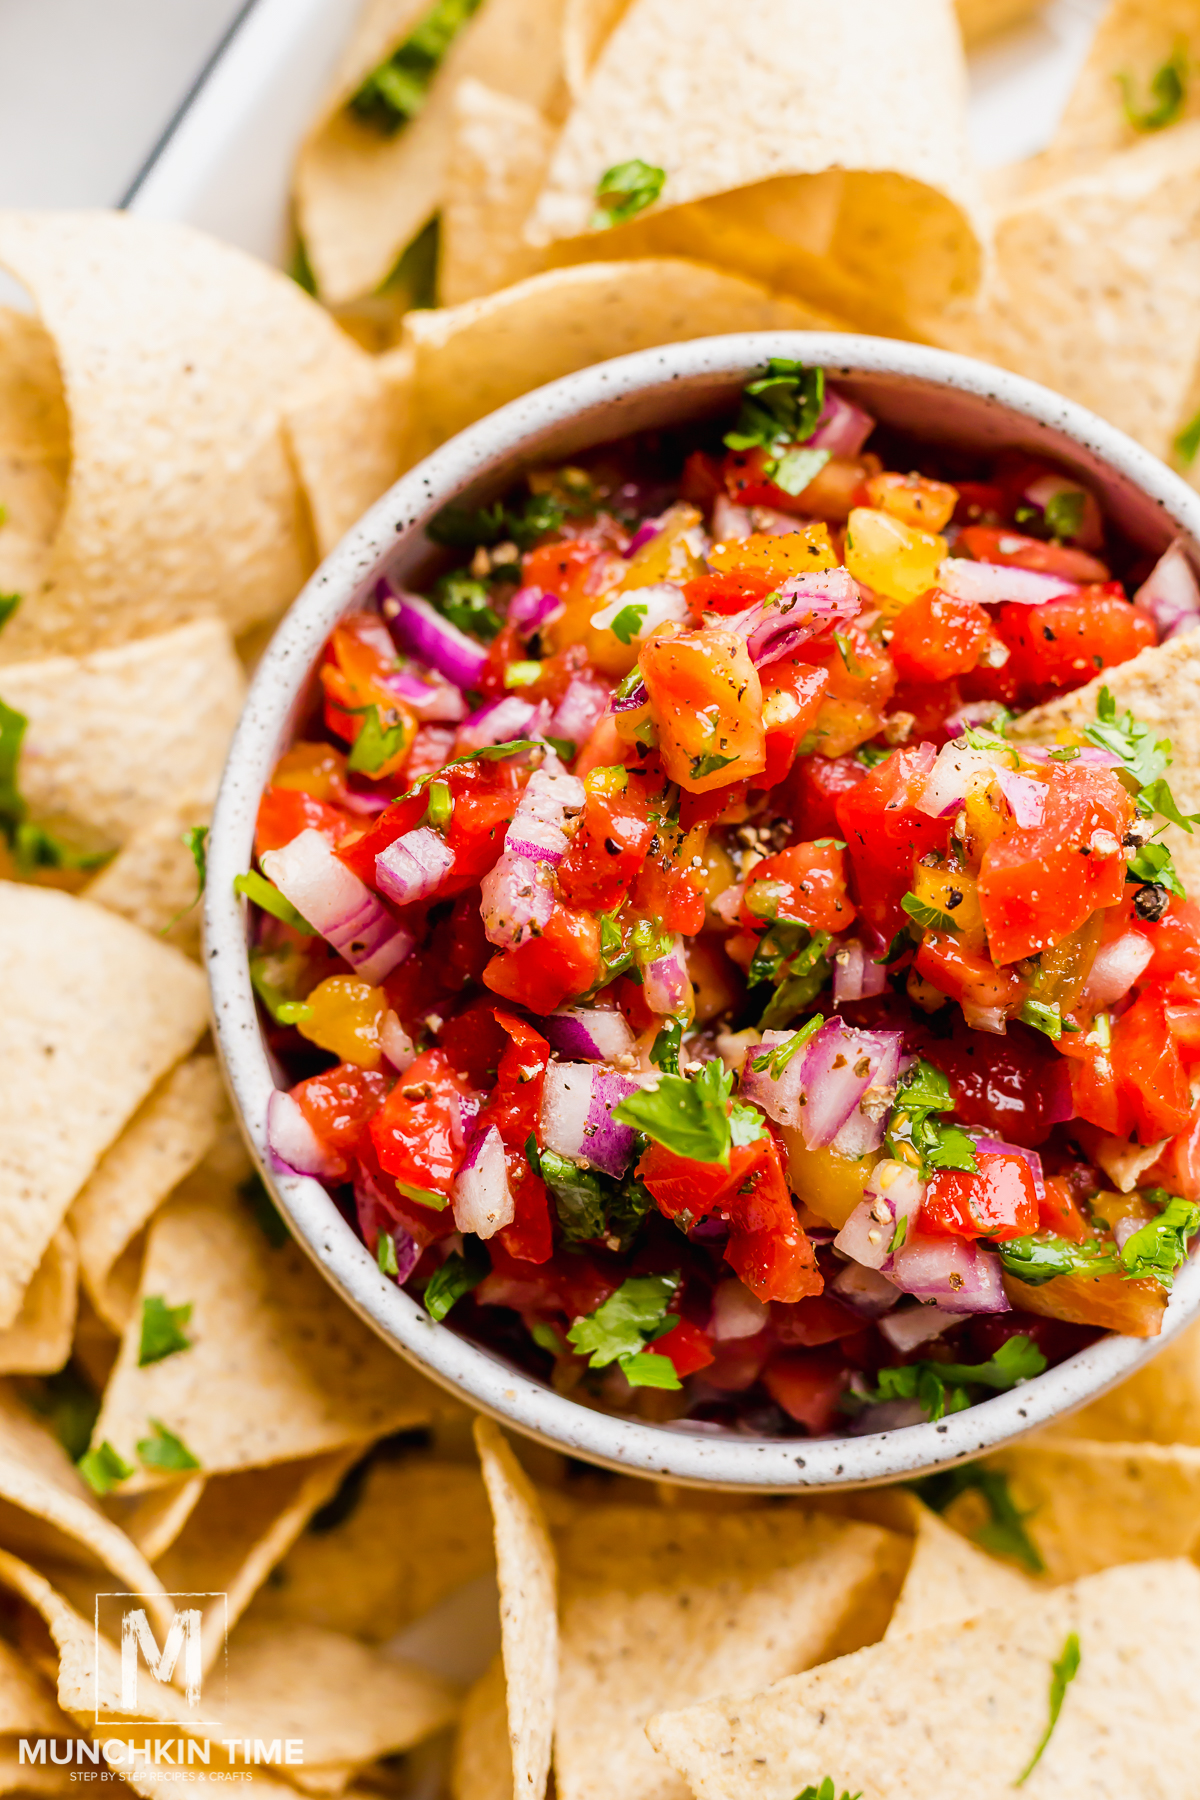 Salsa Tips and substitutions